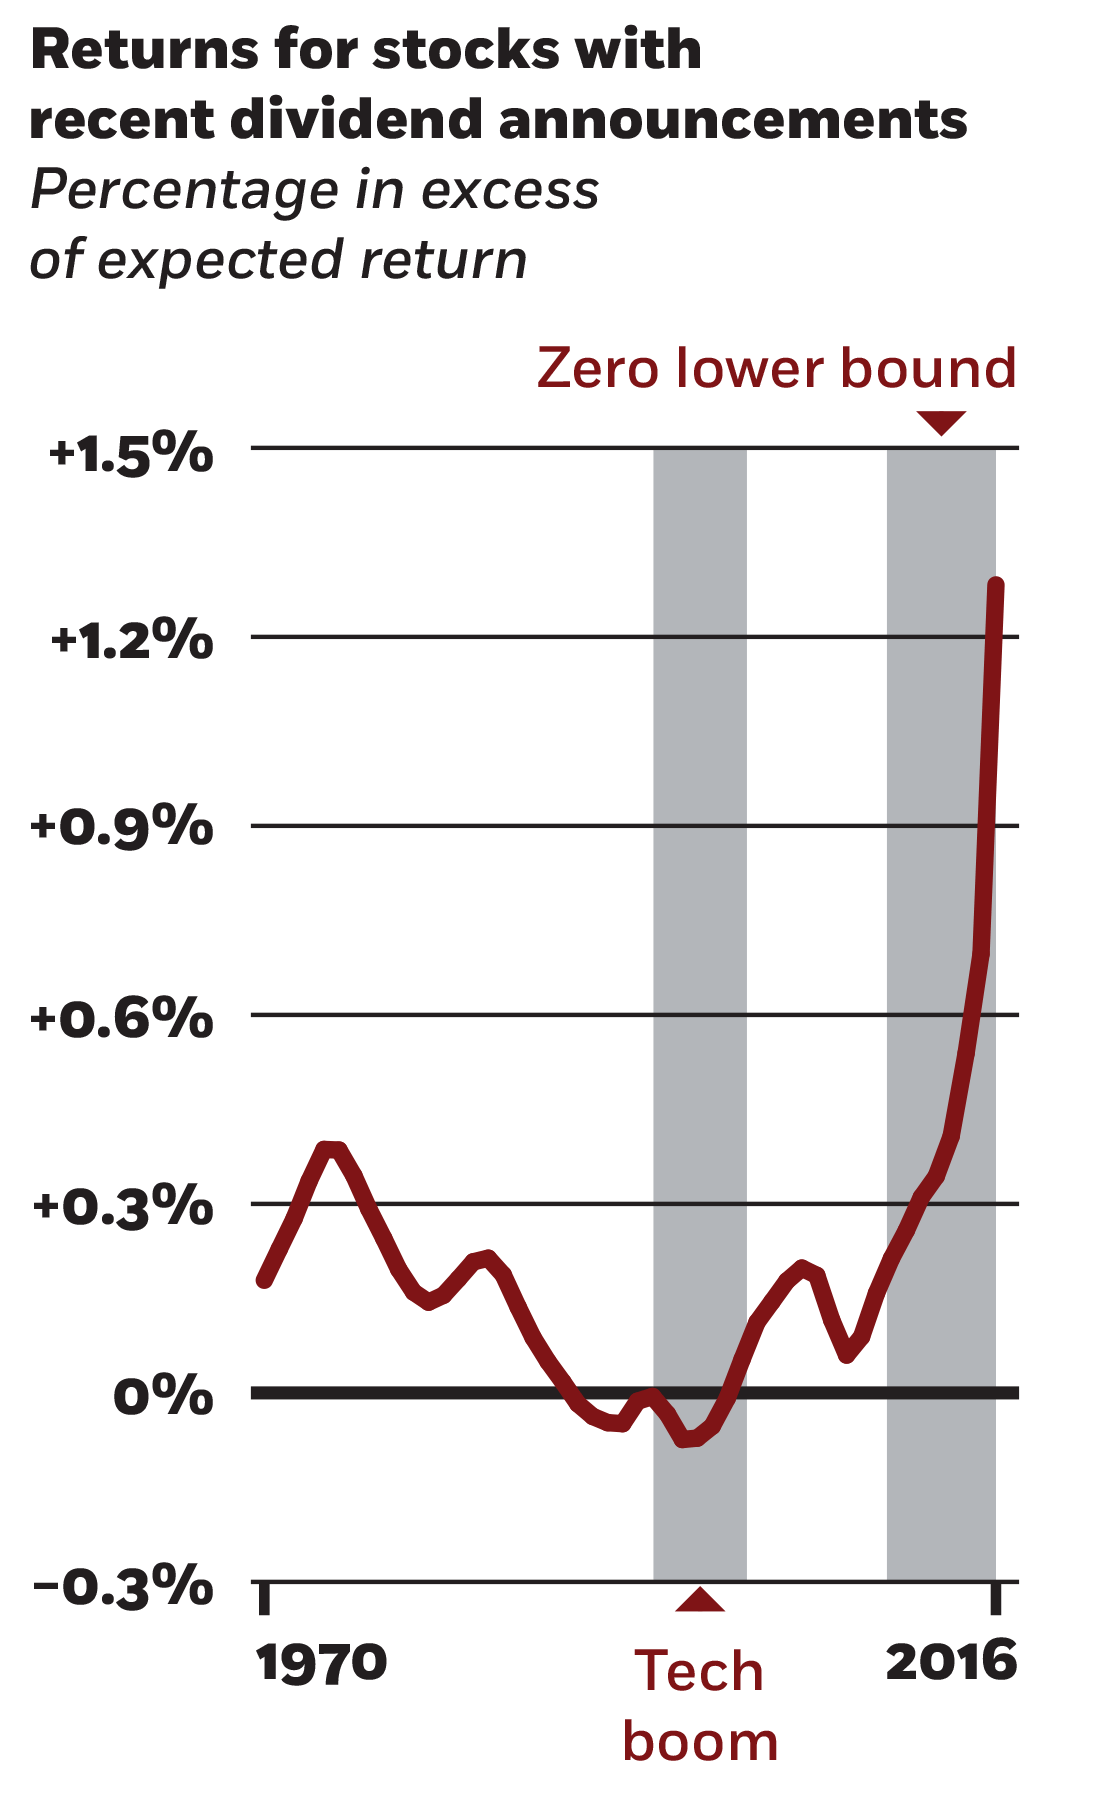  A line chart plotting returns for stocks with recent dividend announcements, with percentage change on the y-axis and the years of 1970 to 2016 on the x-axis. A line tracking the change in excess of the expected return ranges from about zero to zero-point-four, drops a bit below zero during the Nineteen-Nineties tech boom, and then spikes to about one-point-three percent after the zero lower bound period began in 2008.